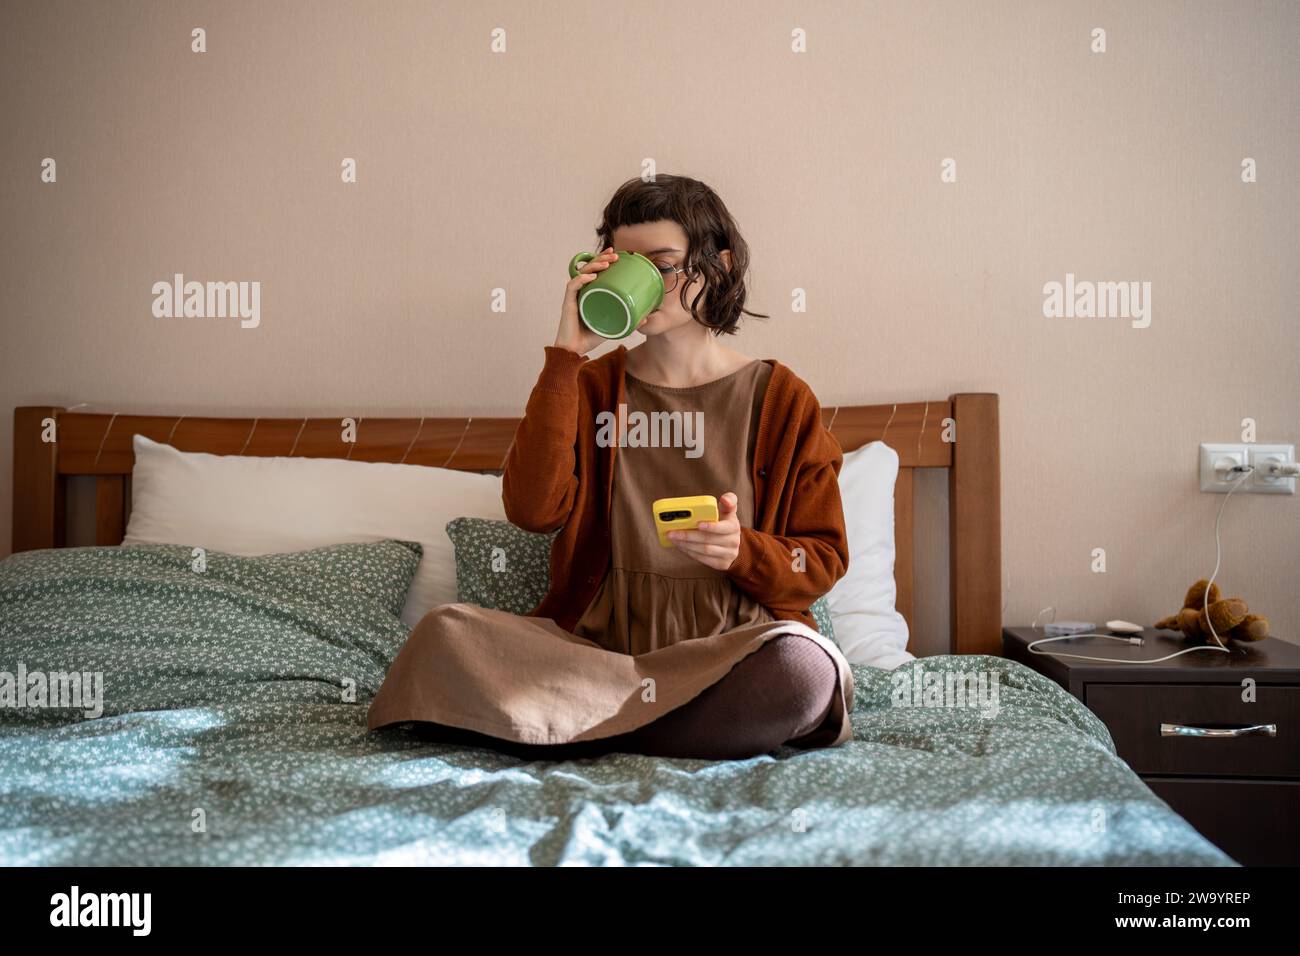 Lazy teenager addicted to internet, smartphone, procrastinating, doing nothing at home, wasting time Stock Photo